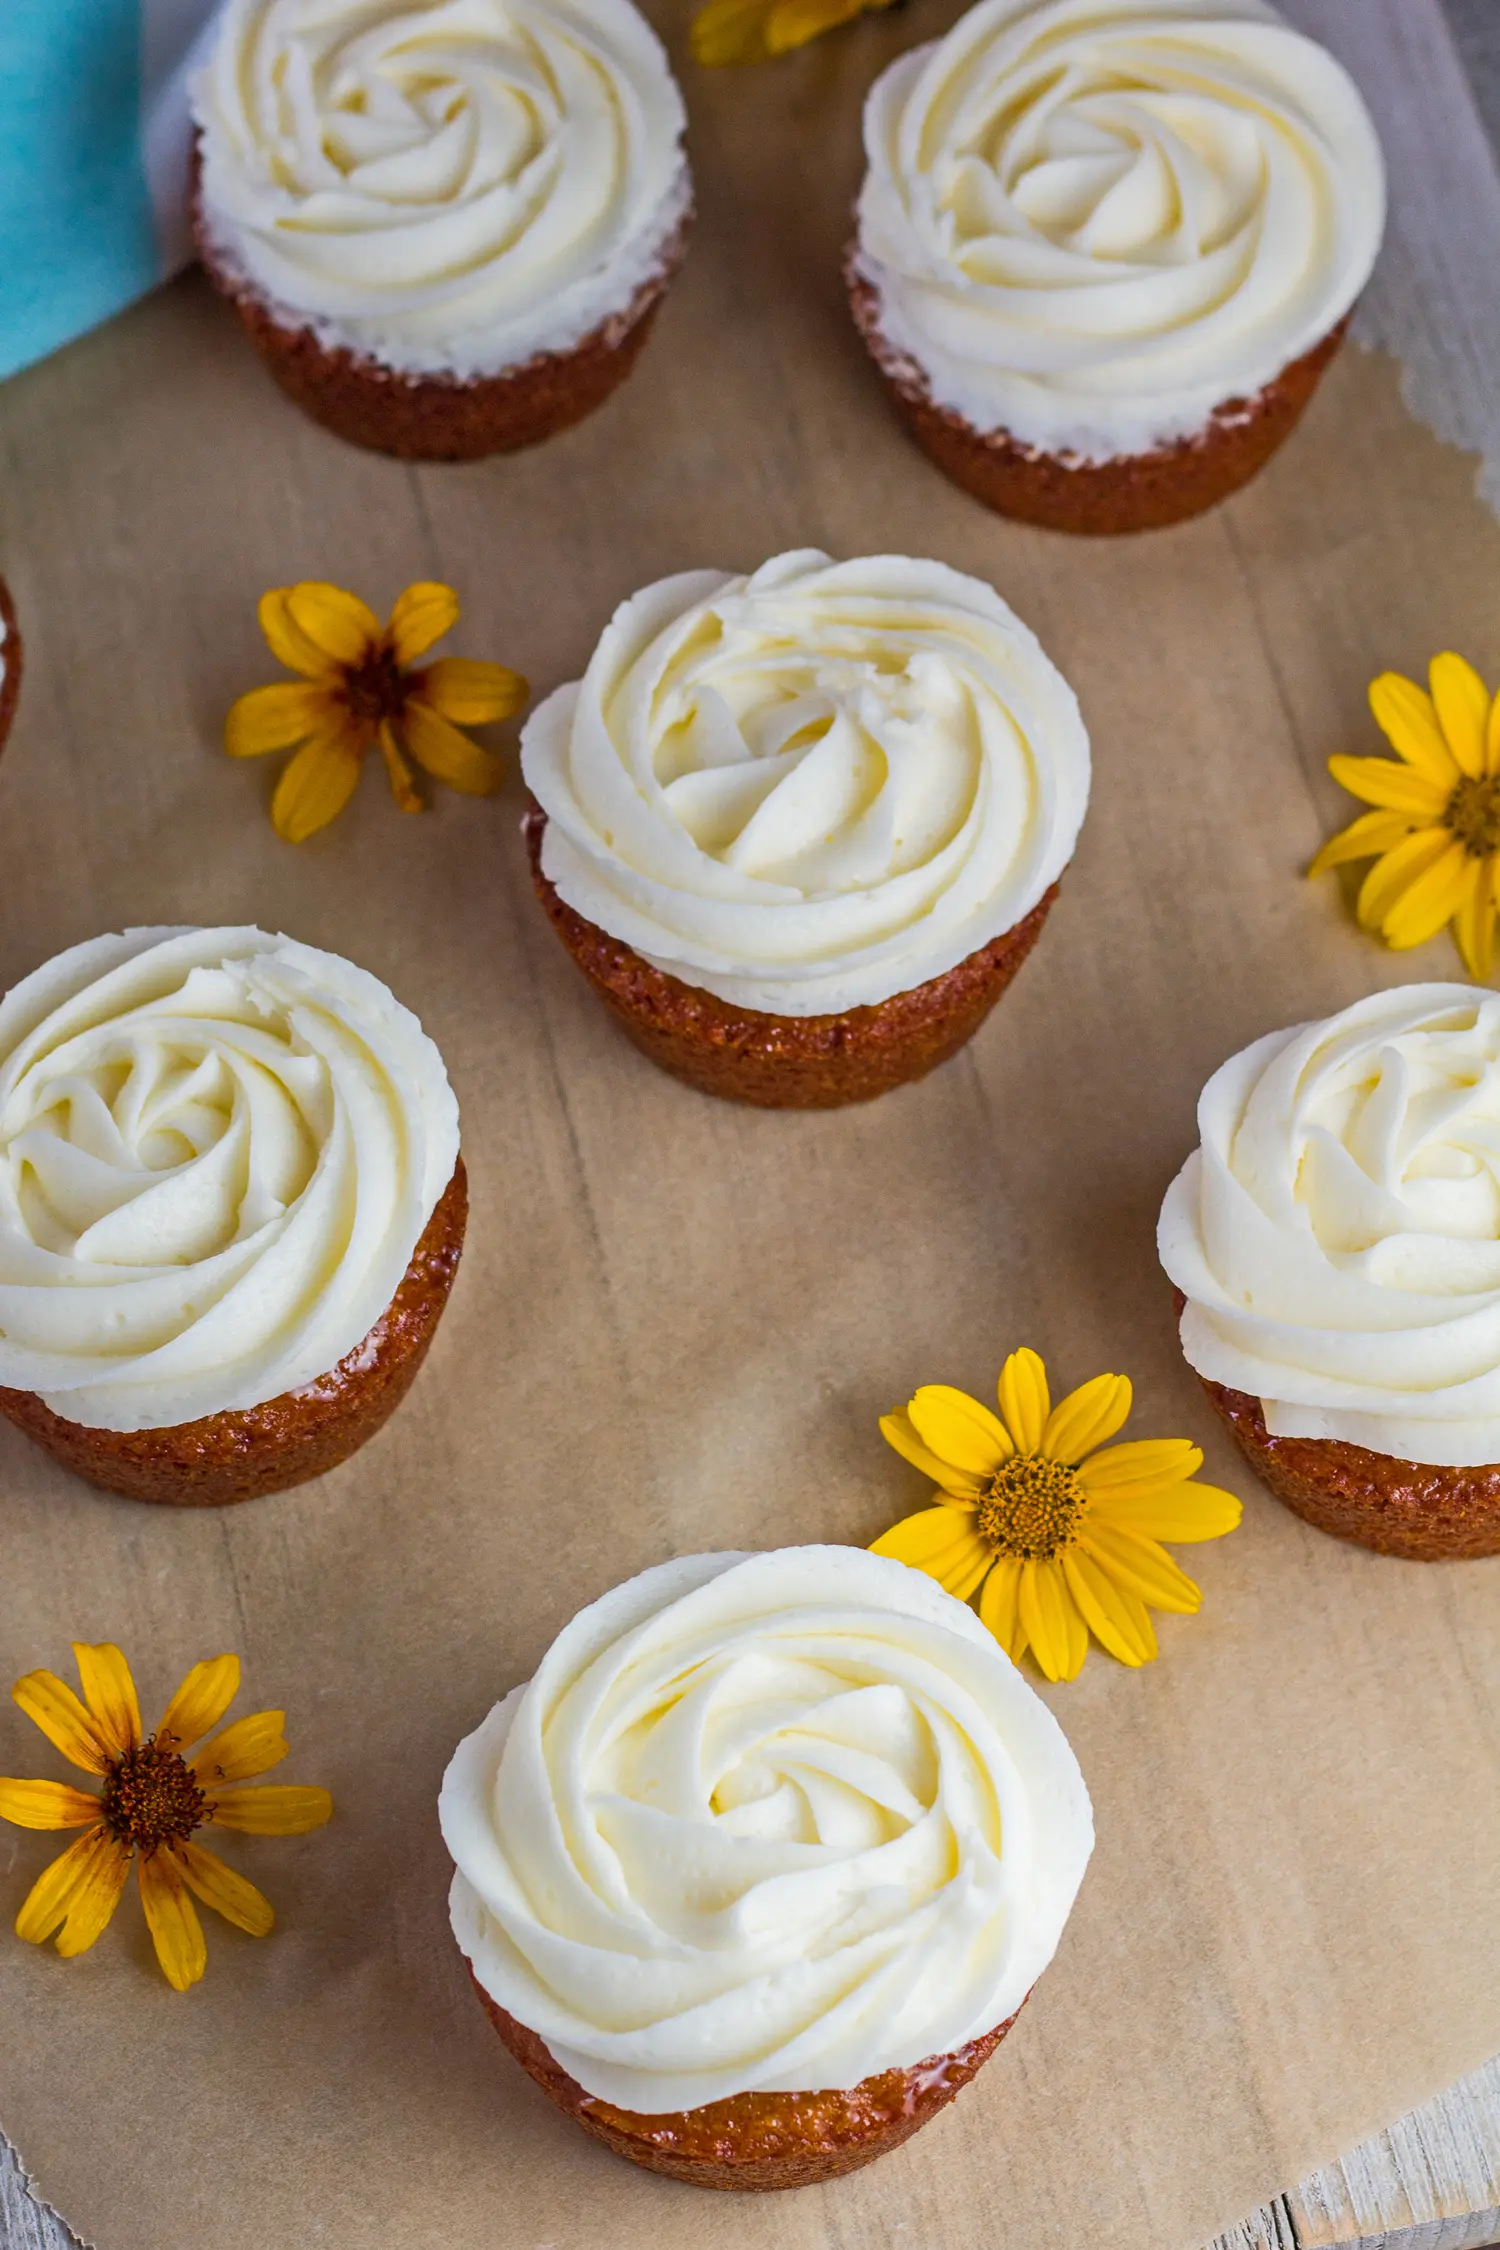 Delicious honey cakes topped with orange frosting from an angled overhead view.